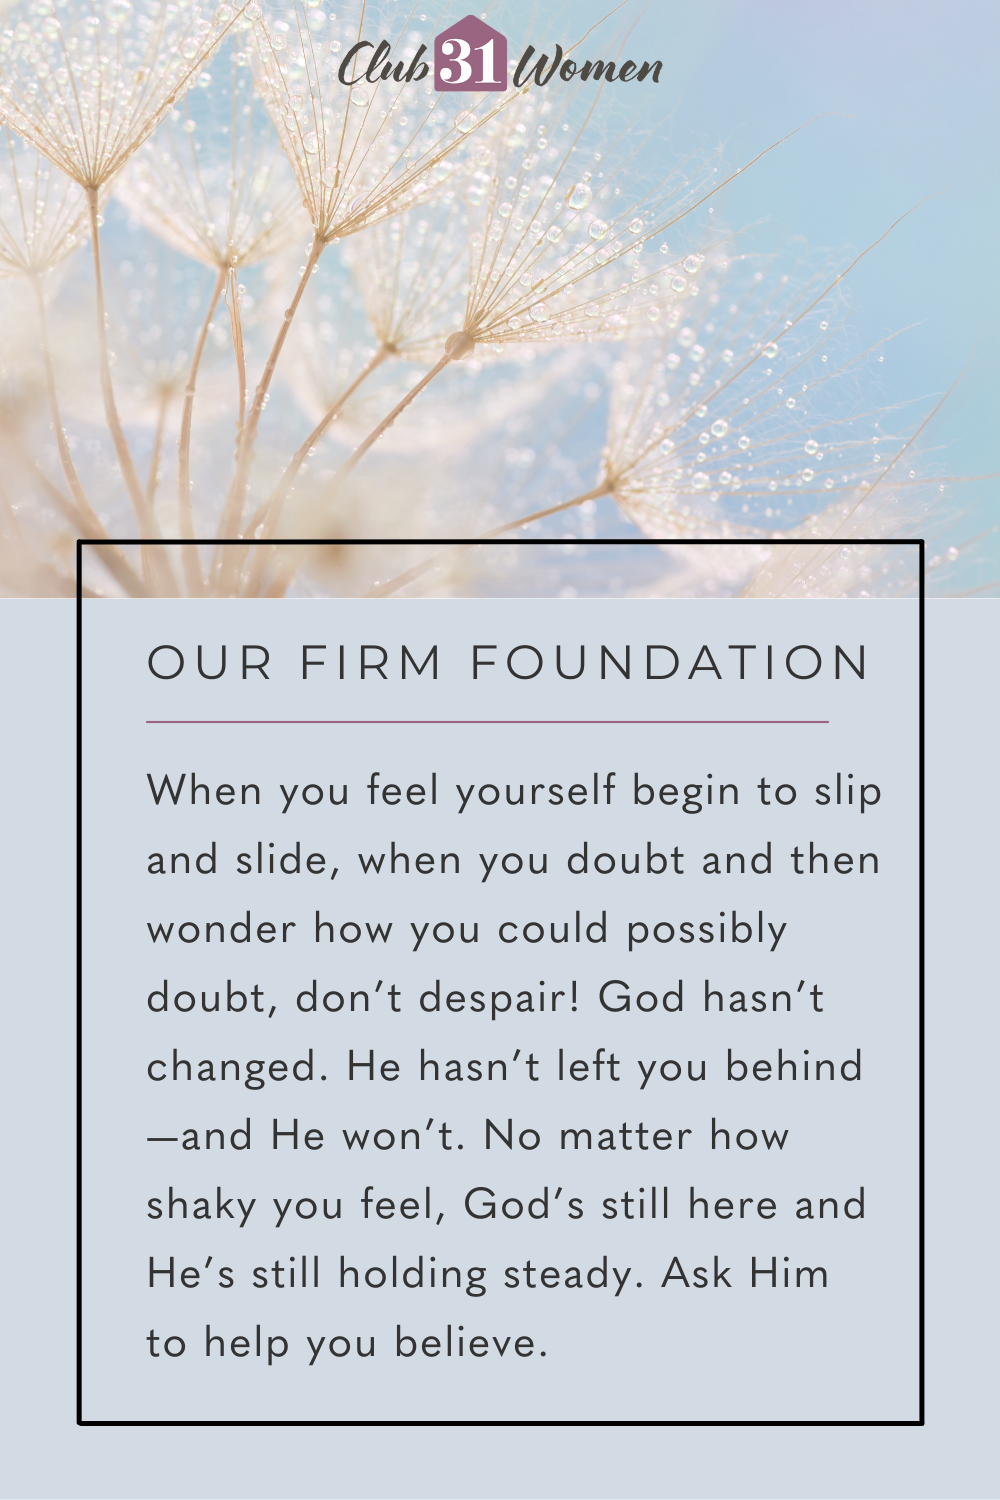 Rediscover hope, emphasizing the unchanging nature of God's love and the steadfast foundation that faith in Him provides, even in the midst of life's storms. via @Club31Women